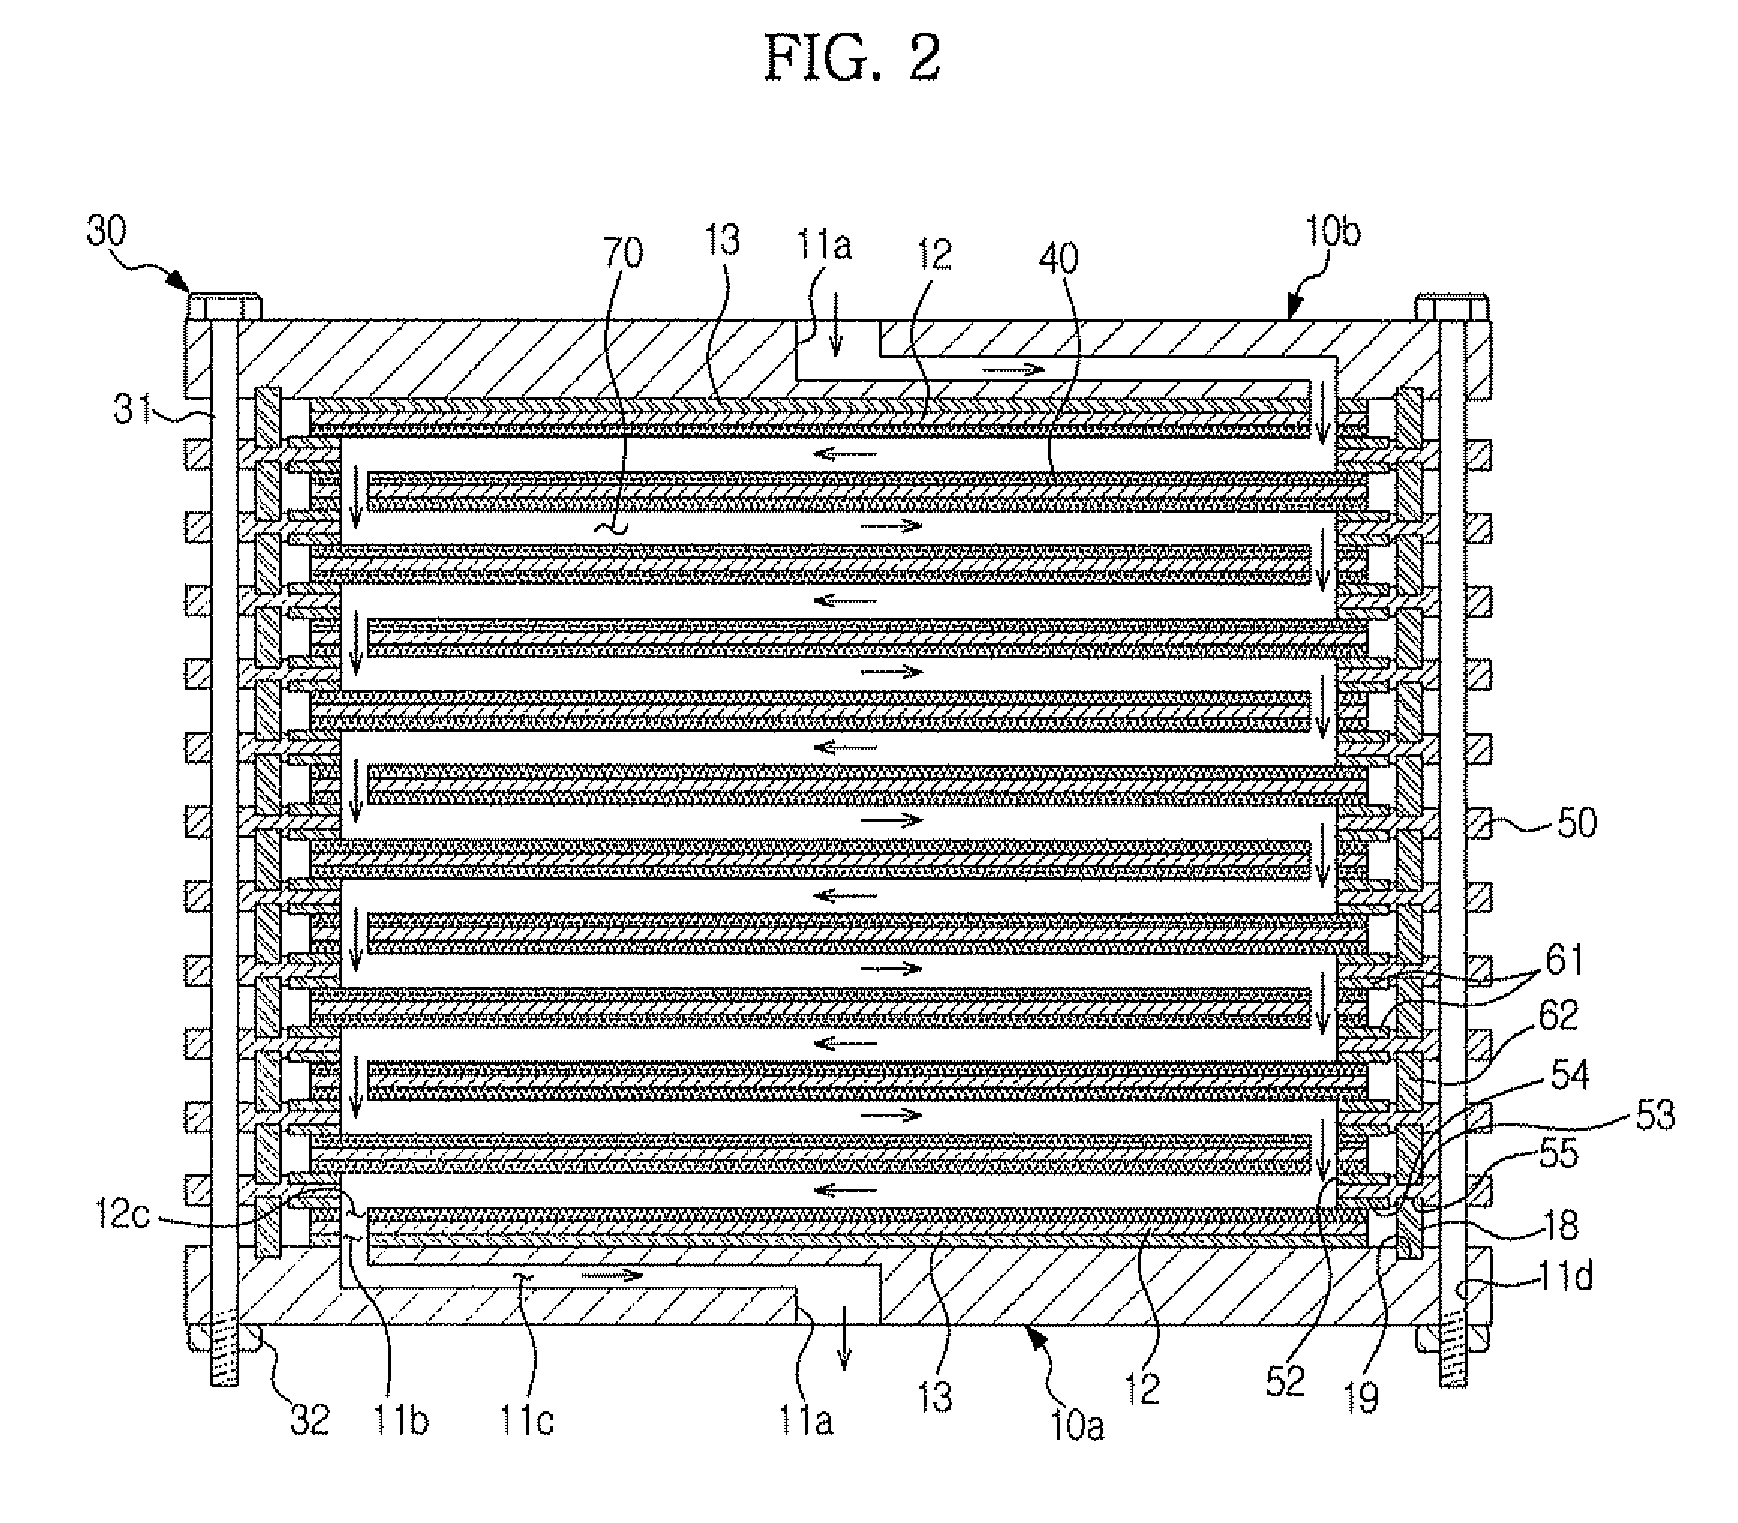 Deionization apparatus and method of manufacturing the same